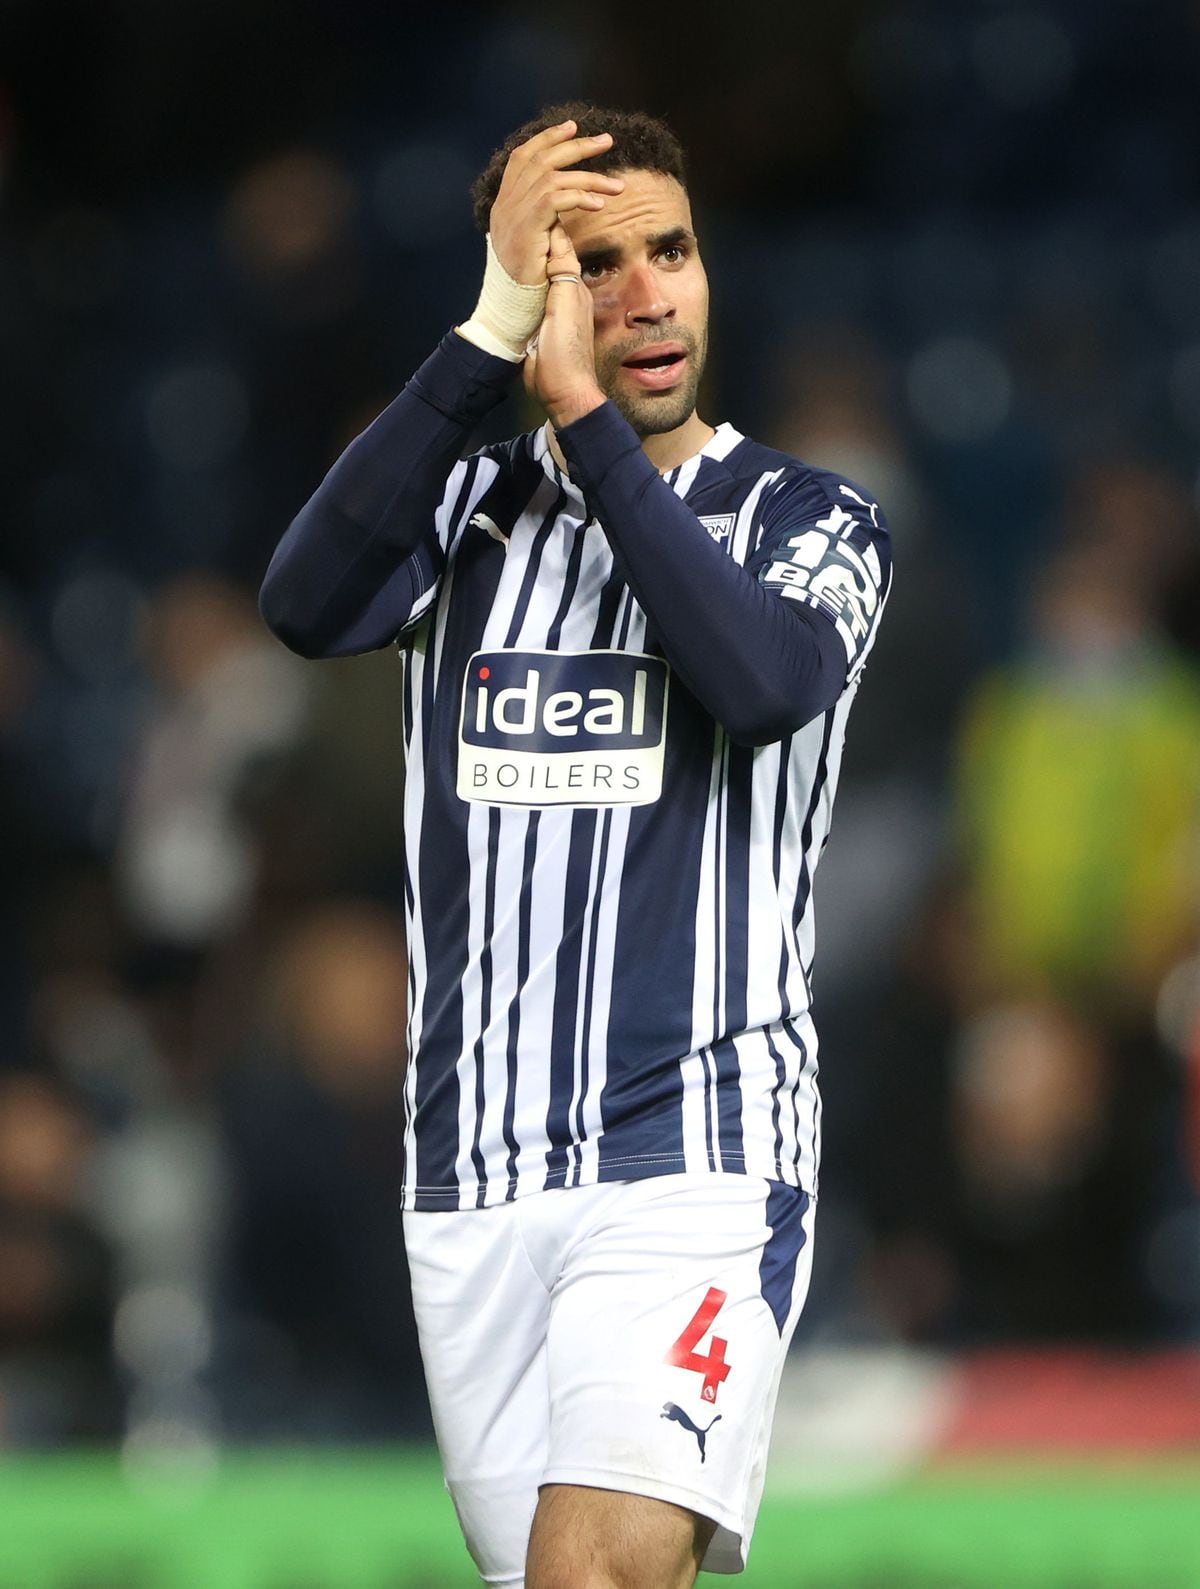 West Bromwich Albion's Hal Robson-Kanu 